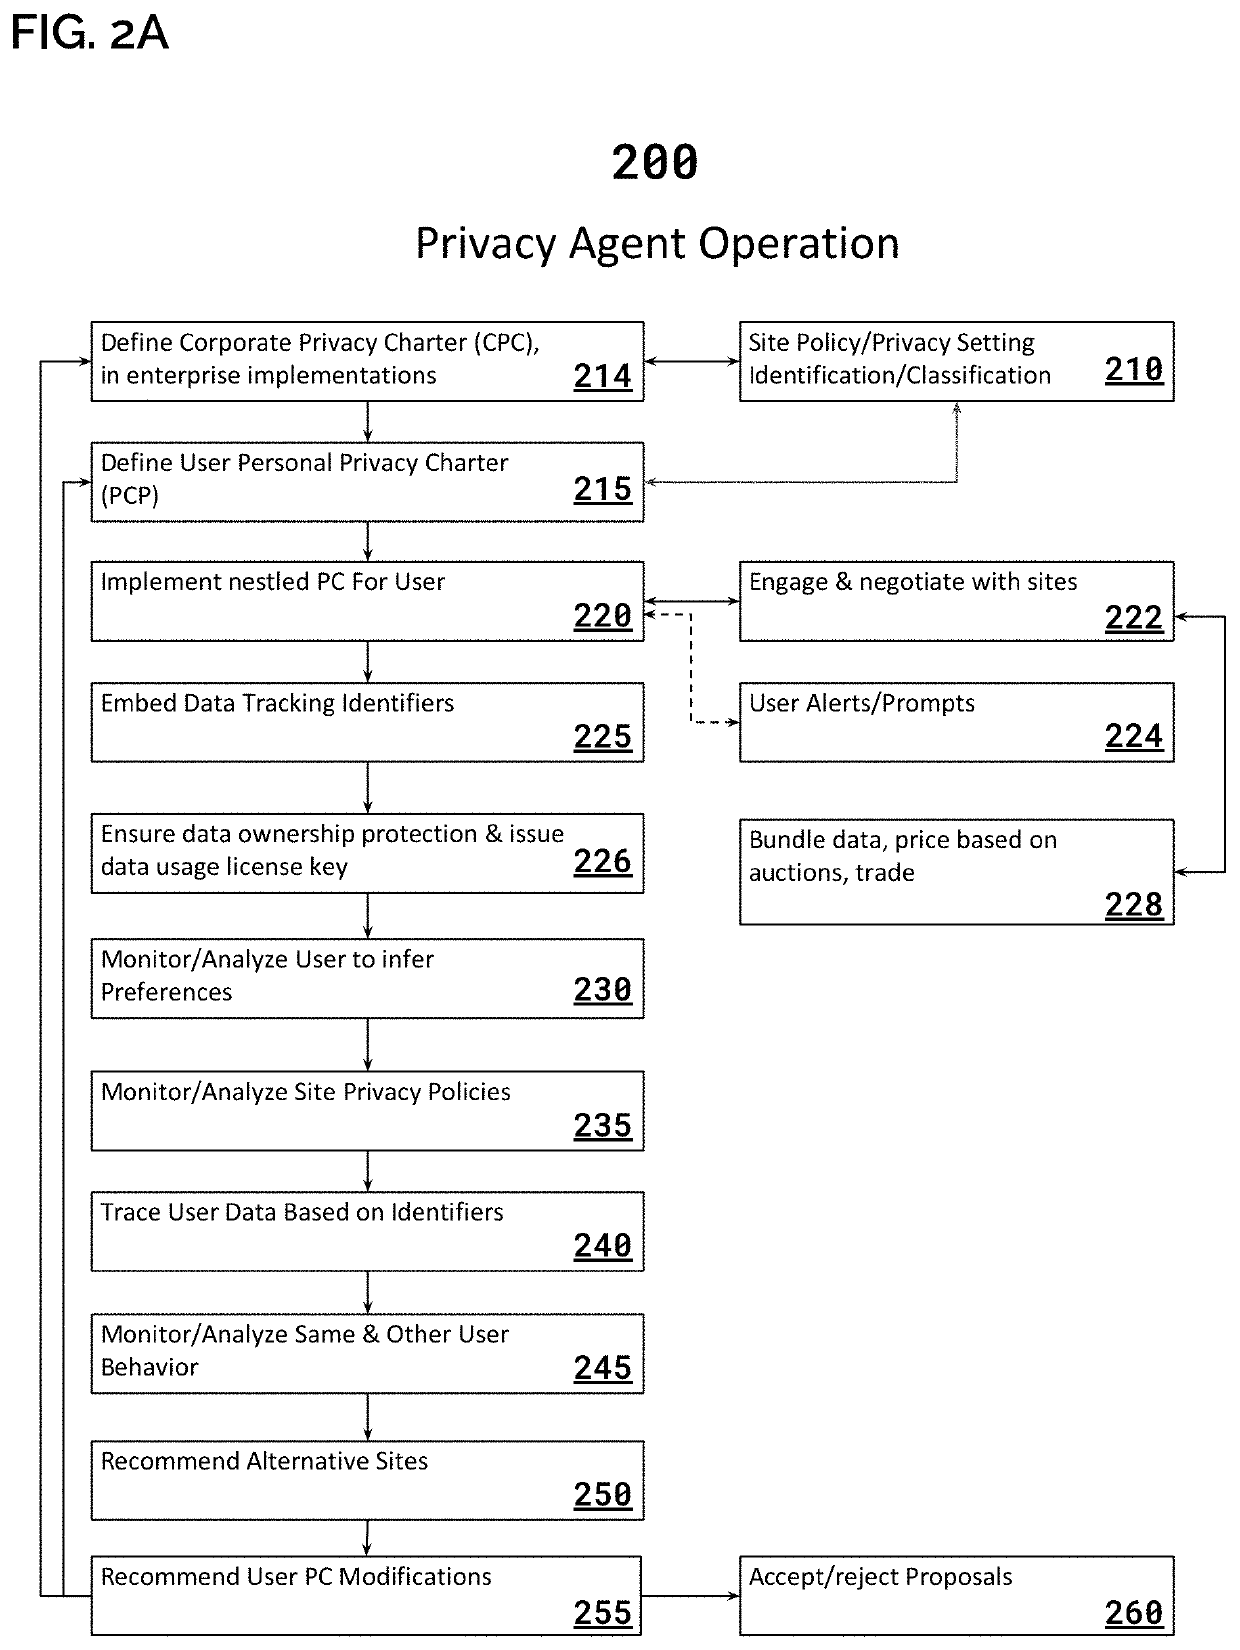 System & Method for Analyzing Privacy Policies